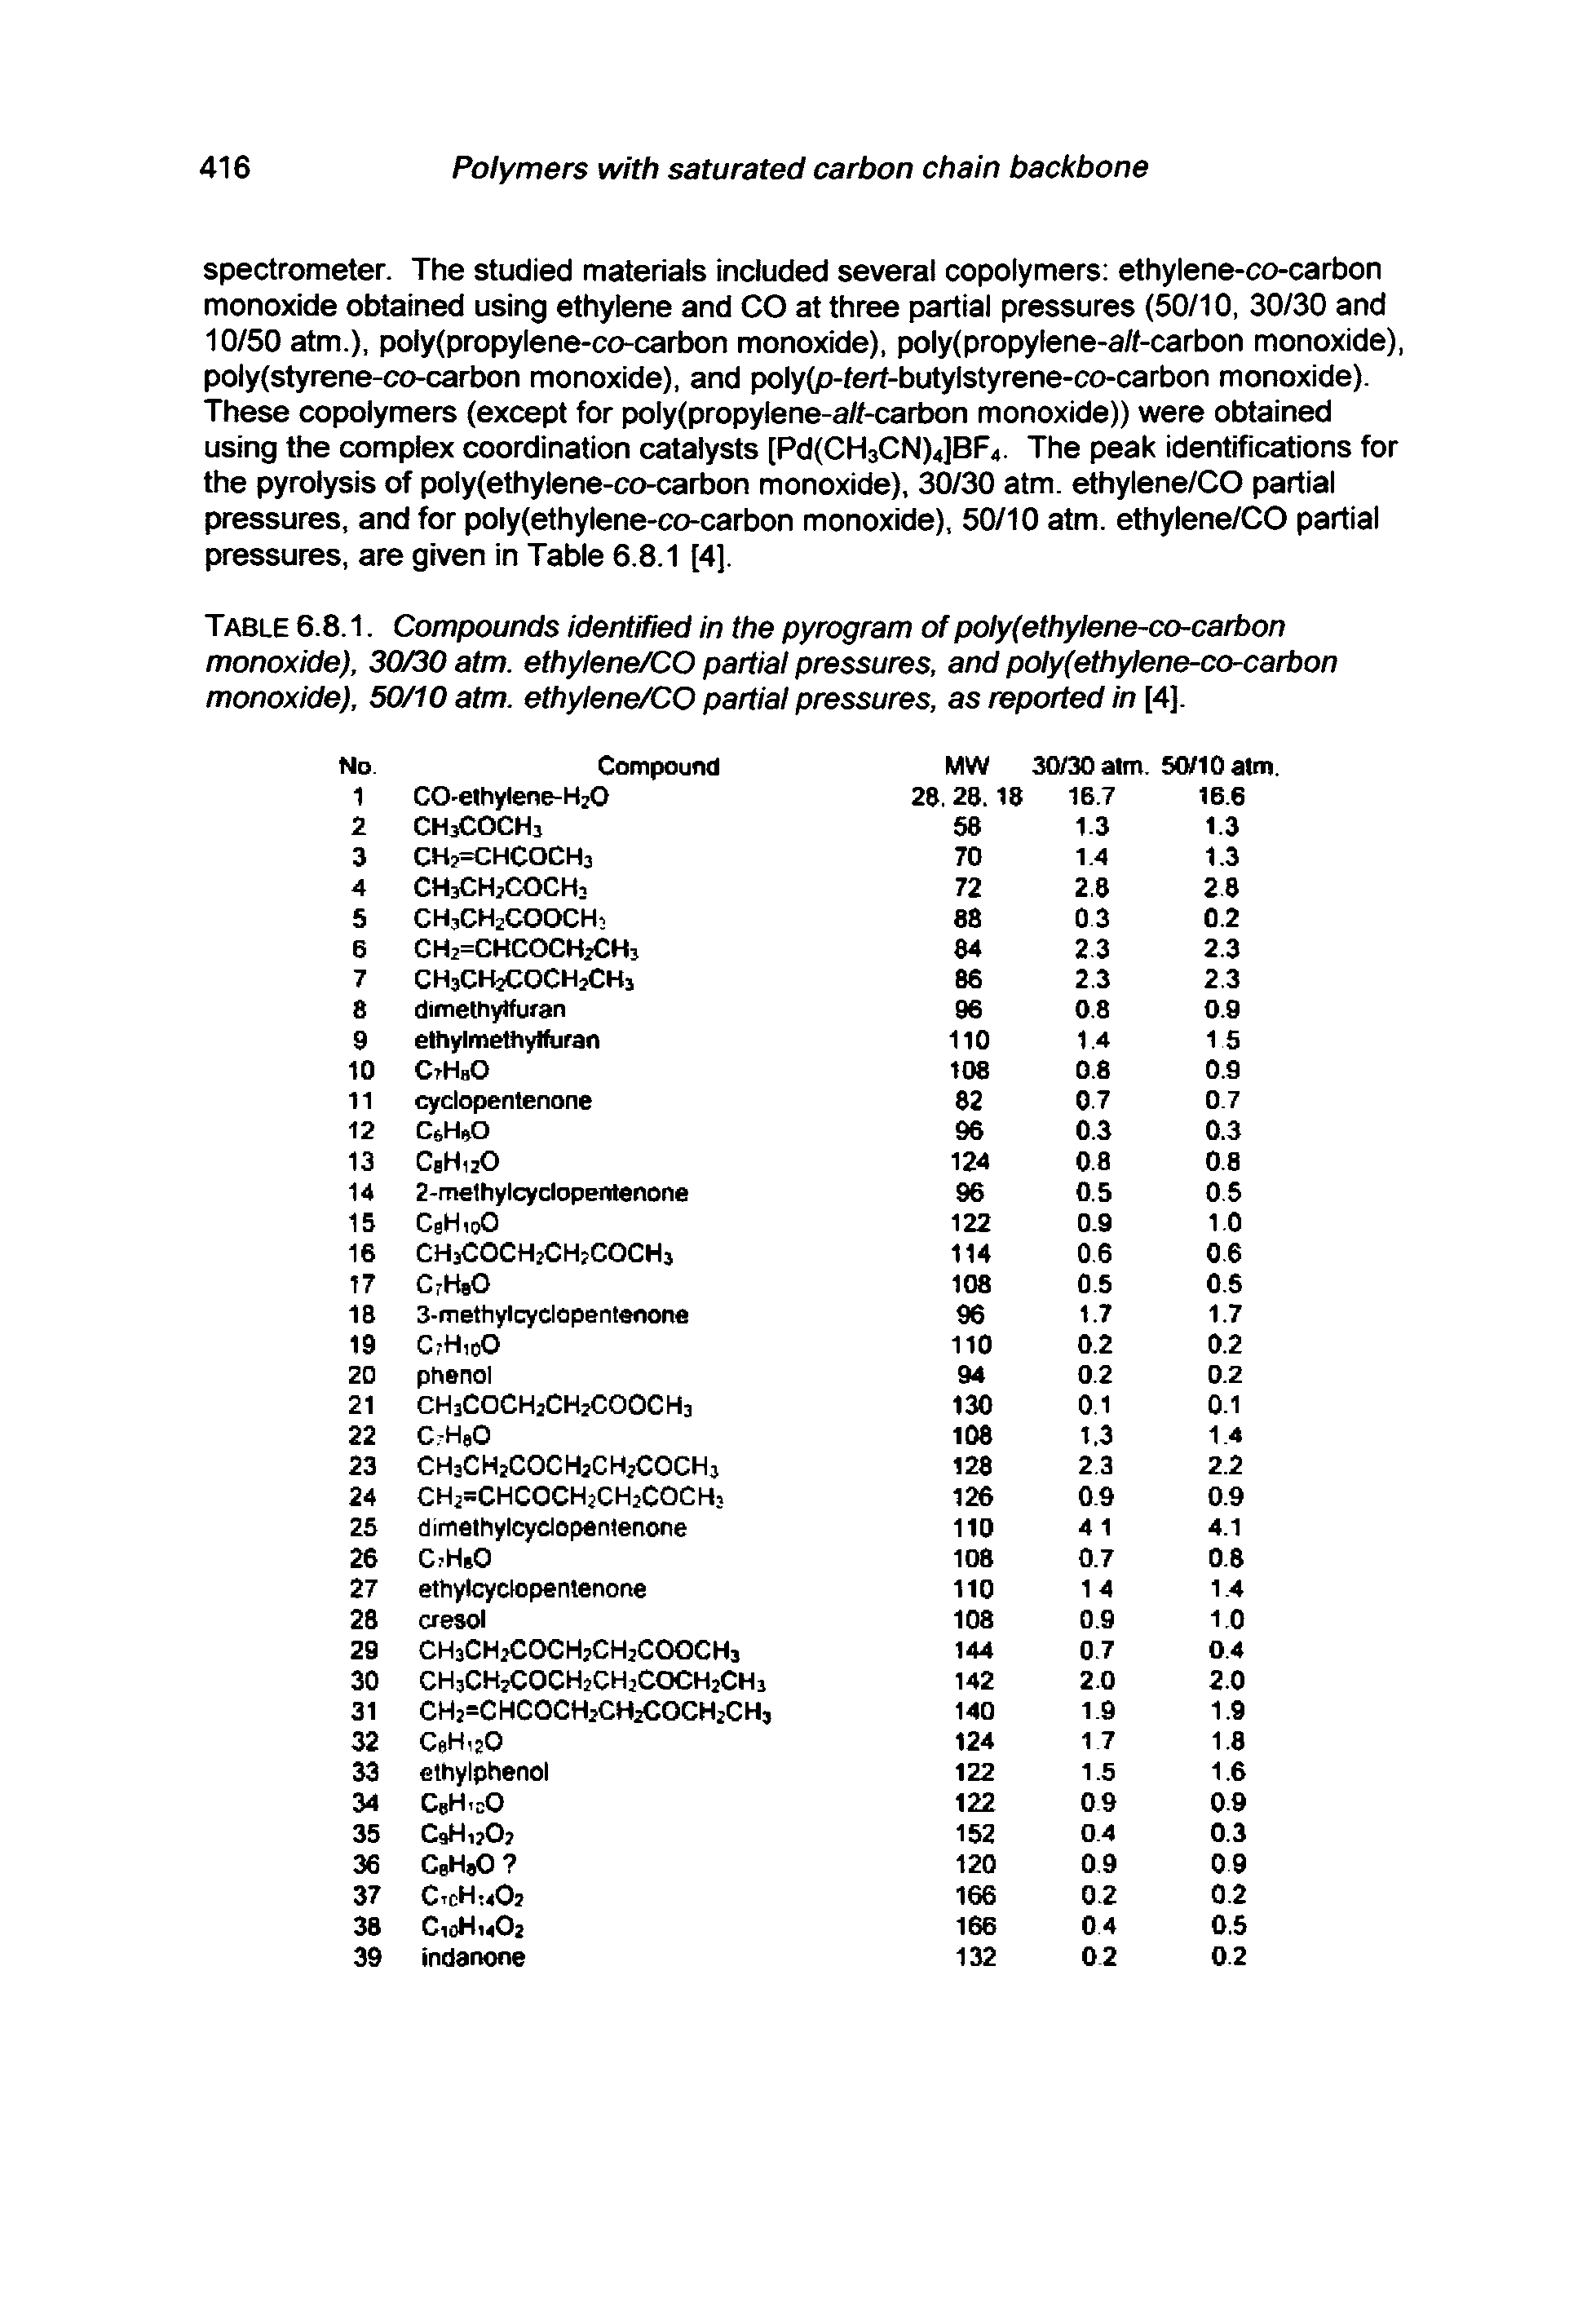 Table 6.8.1. Compounds identified in the pyrogram of poly(ethylene-co-carbon monoxide), 30/30 atm. ethylene/CO partial pressures, and poly(ethylene-co-carbon monoxide), 50/10 atm. ethylene/CO partial pressures, as reported in [4].